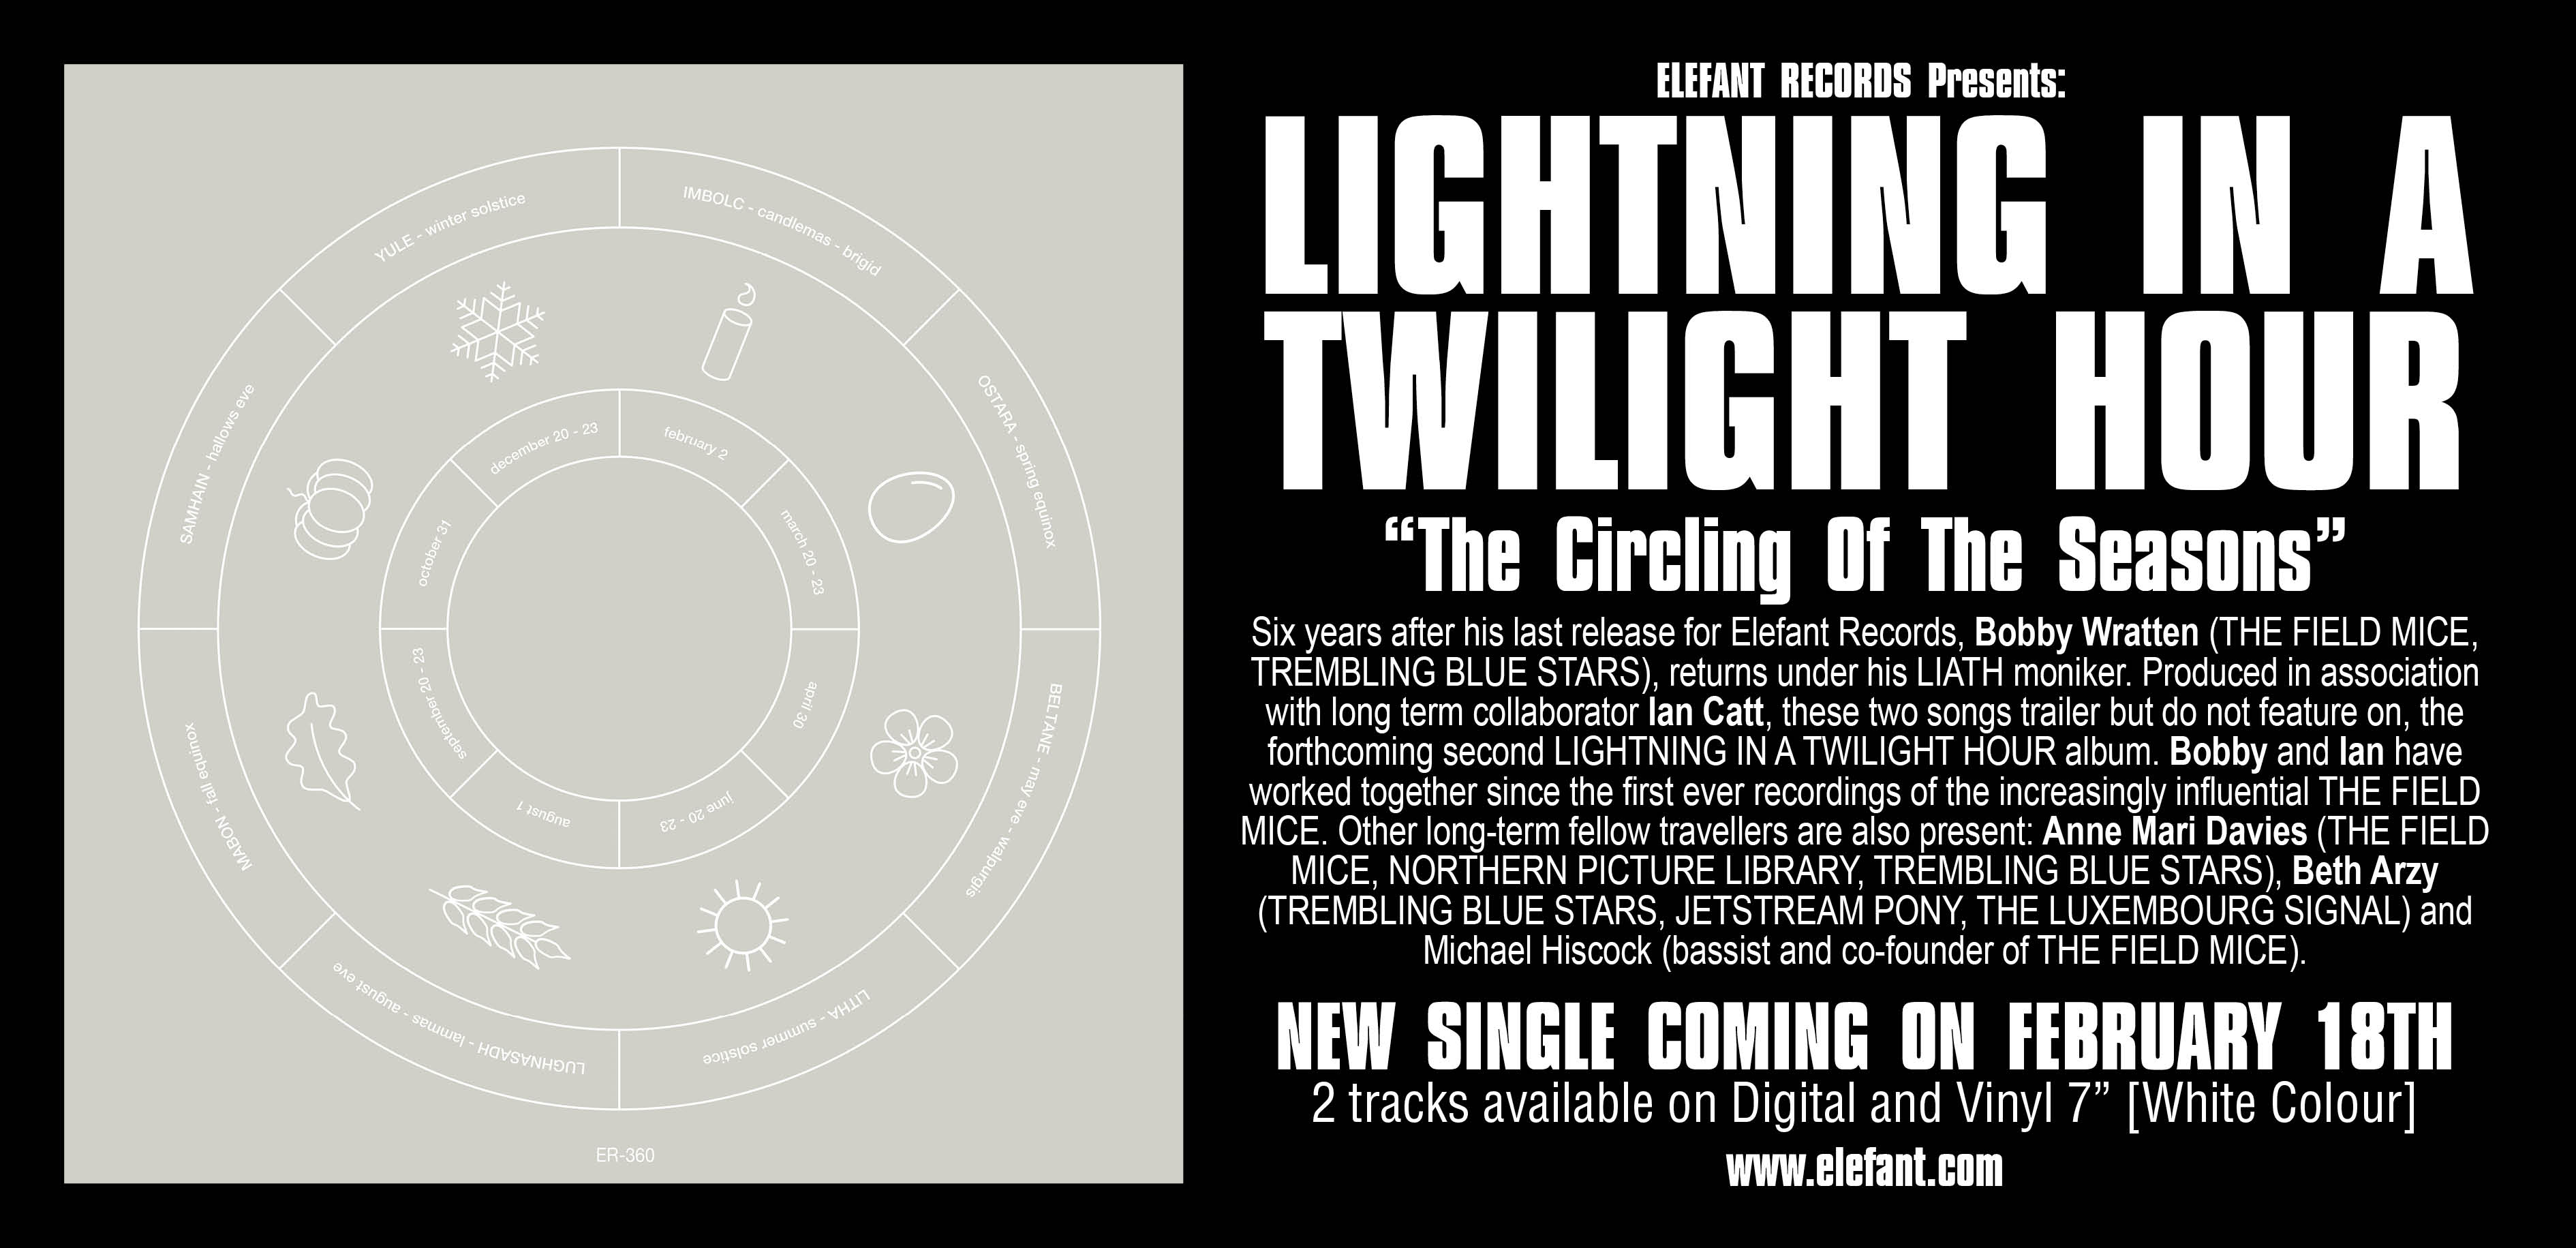 Lightning In A Twilight Hour "The Circling Of The Seasons" 7" Single